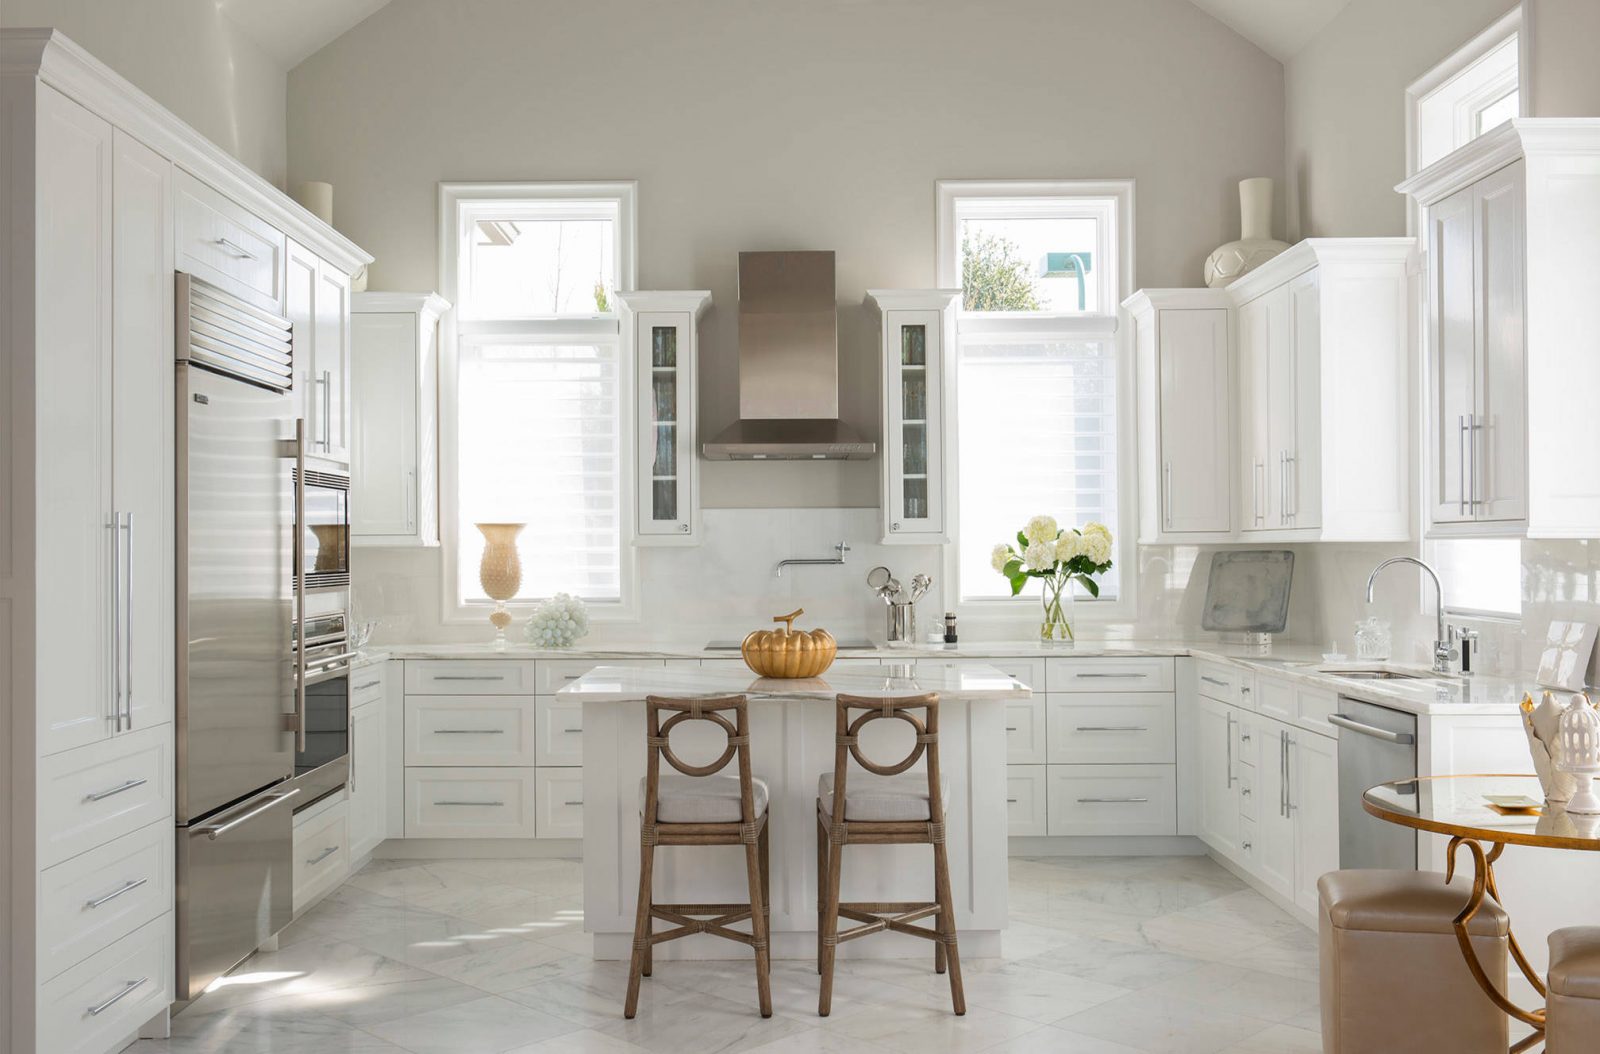 Mediterranean Kitchen With White Cabinets And Greige Sherwin Williams SW 7647 Crushed Ice Wall Paint Color 1600x1054 